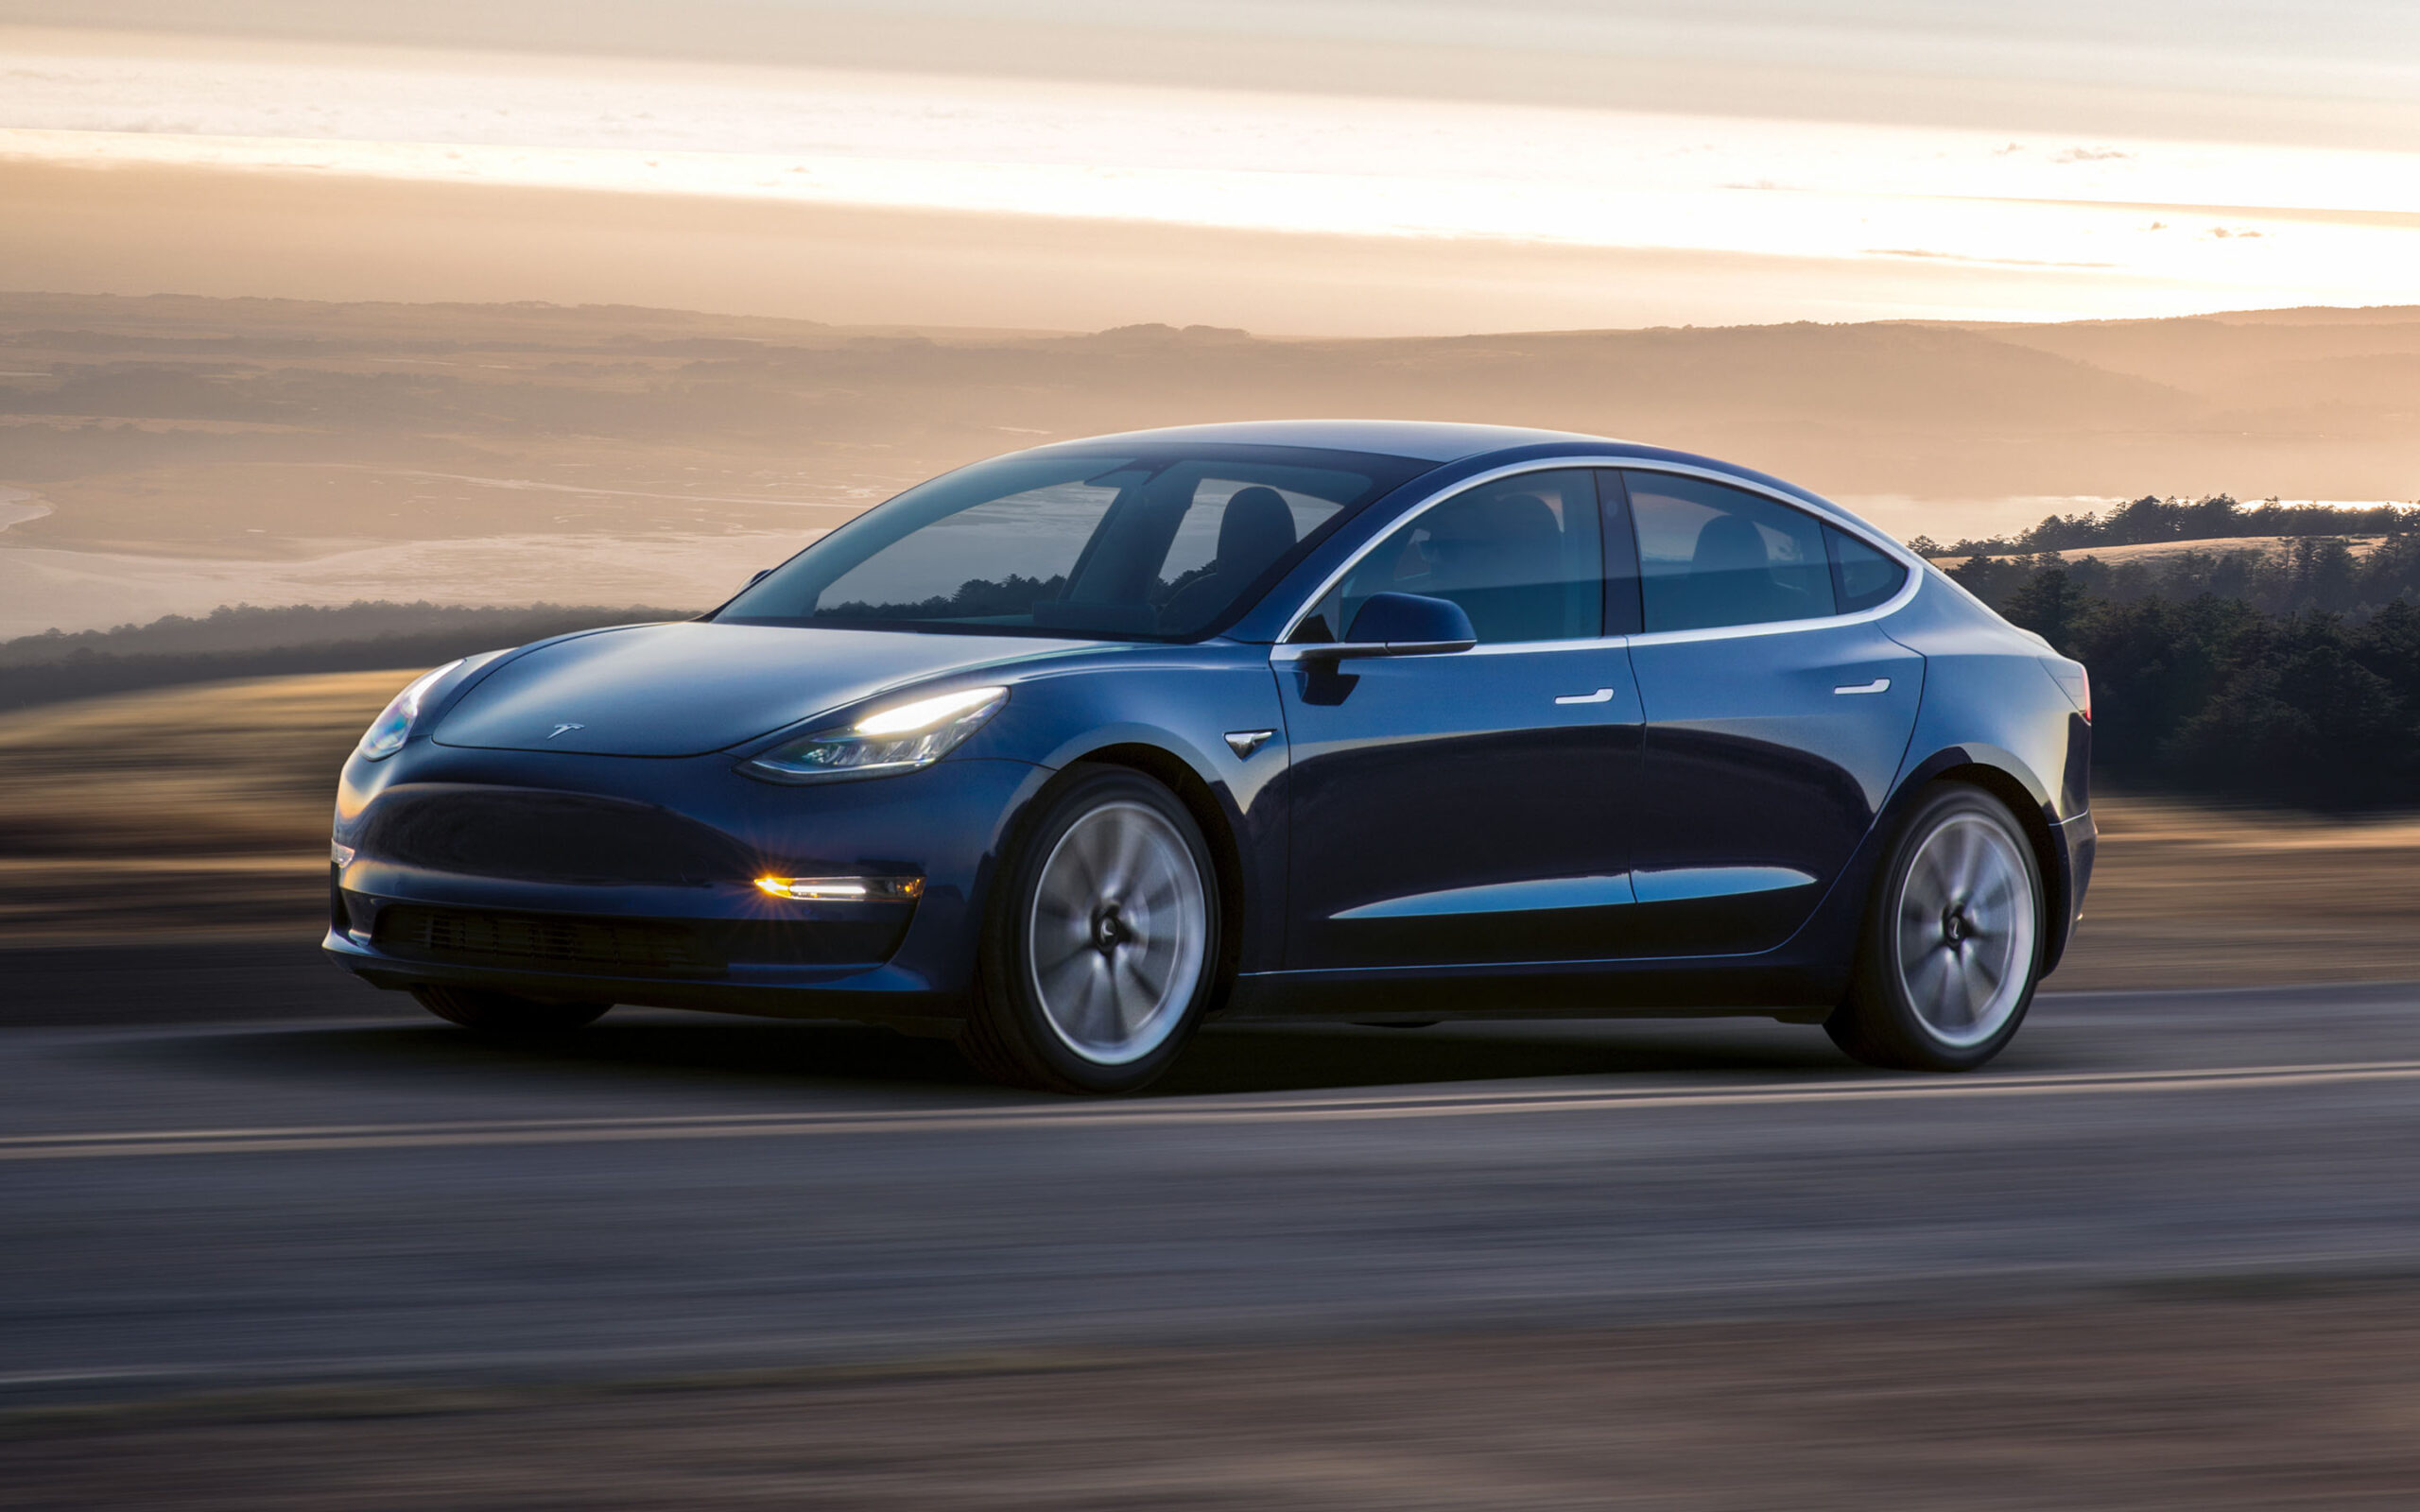 Monday Musings: 5 Reasons You Should Give Up Your Place On The Tesla Model 3 Waiting List